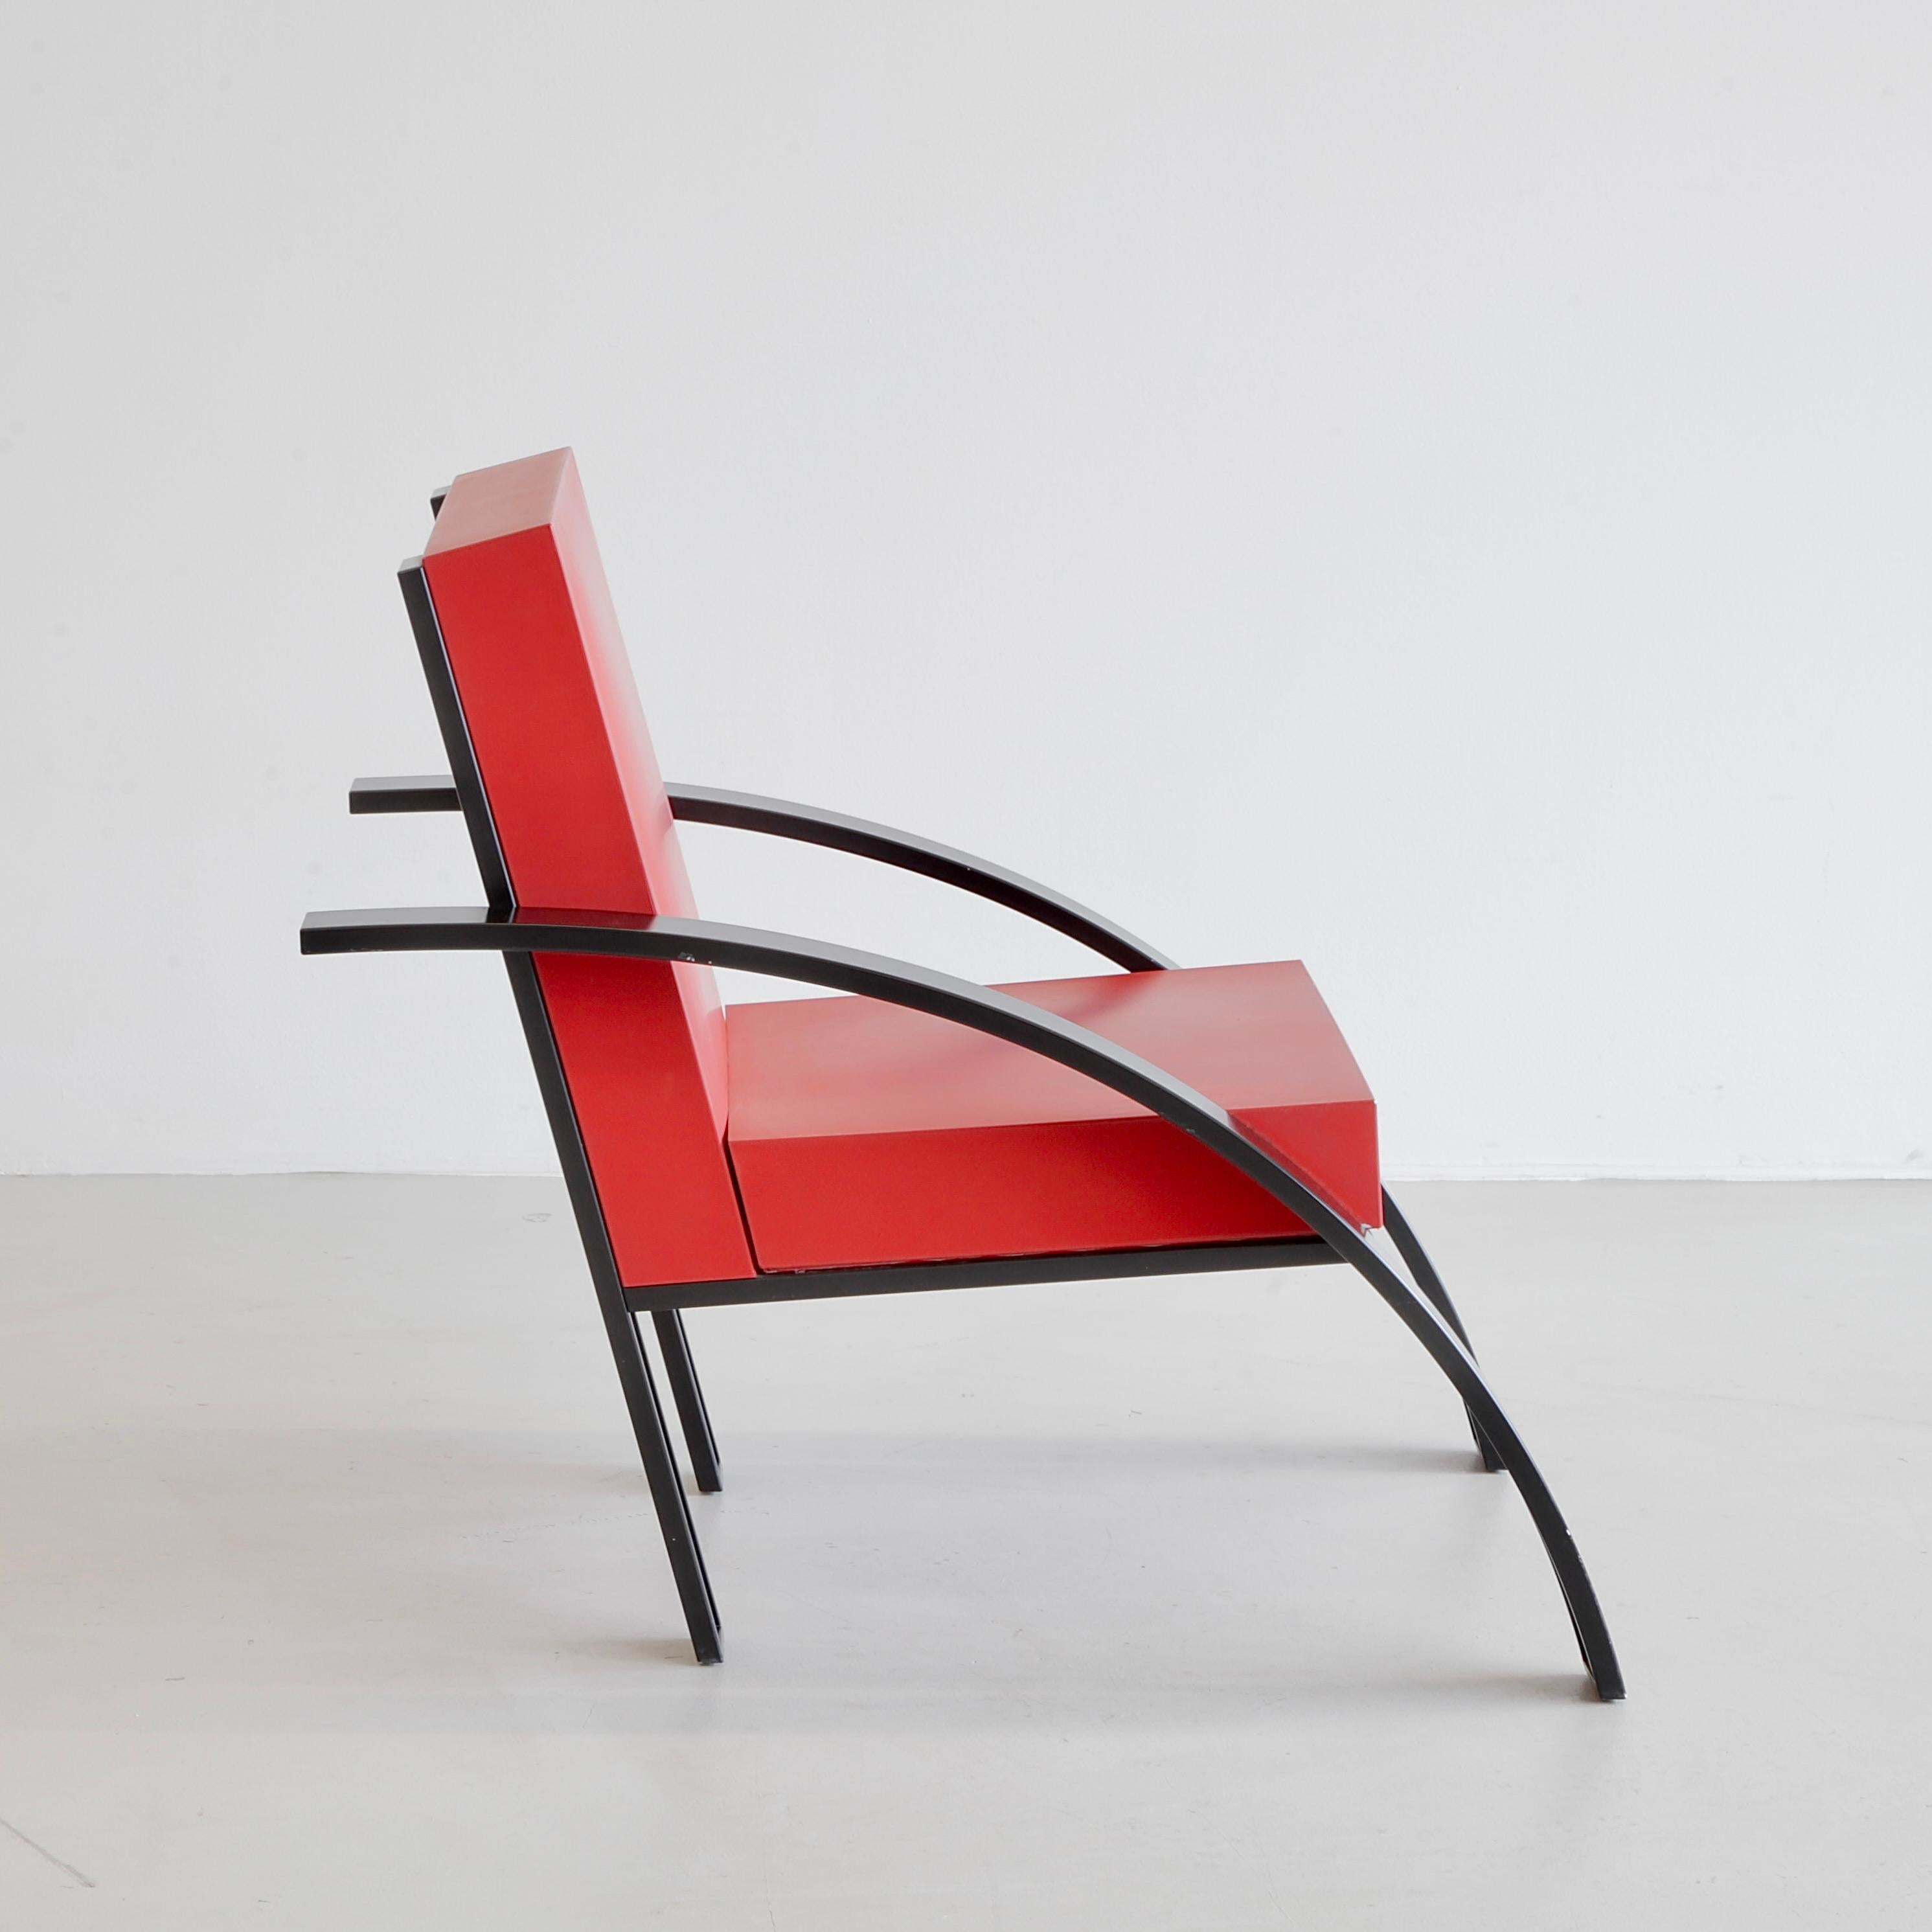 Pair of PARIGI chairs designed by Aldo Rosse. Italy, UniFor, 1989.

A rare pair of the PARIGI armchairs created by Aldo Rossi. Black-painted aluminium tube frame with a self-supporting seat and backrest in polyurethane foam with a red paint